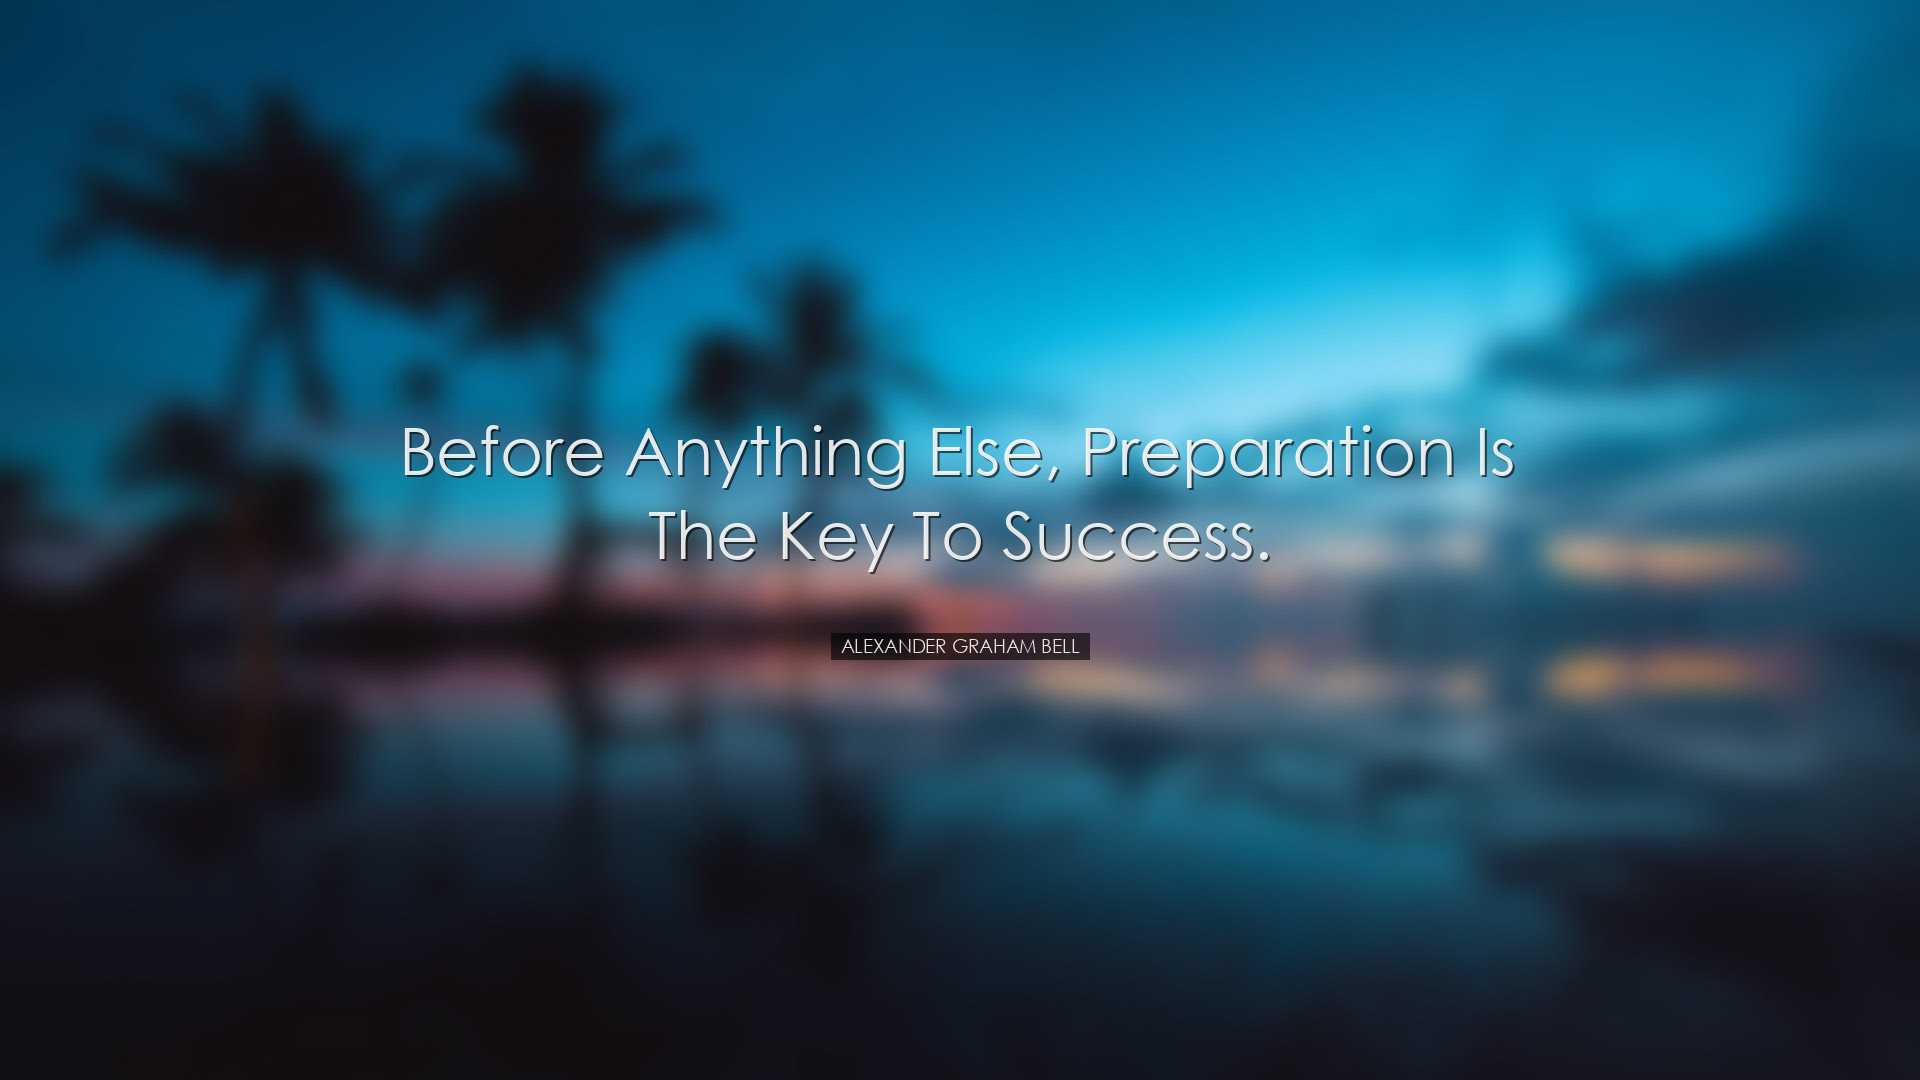 Before anything else, preparation is the key to success. - Alexand